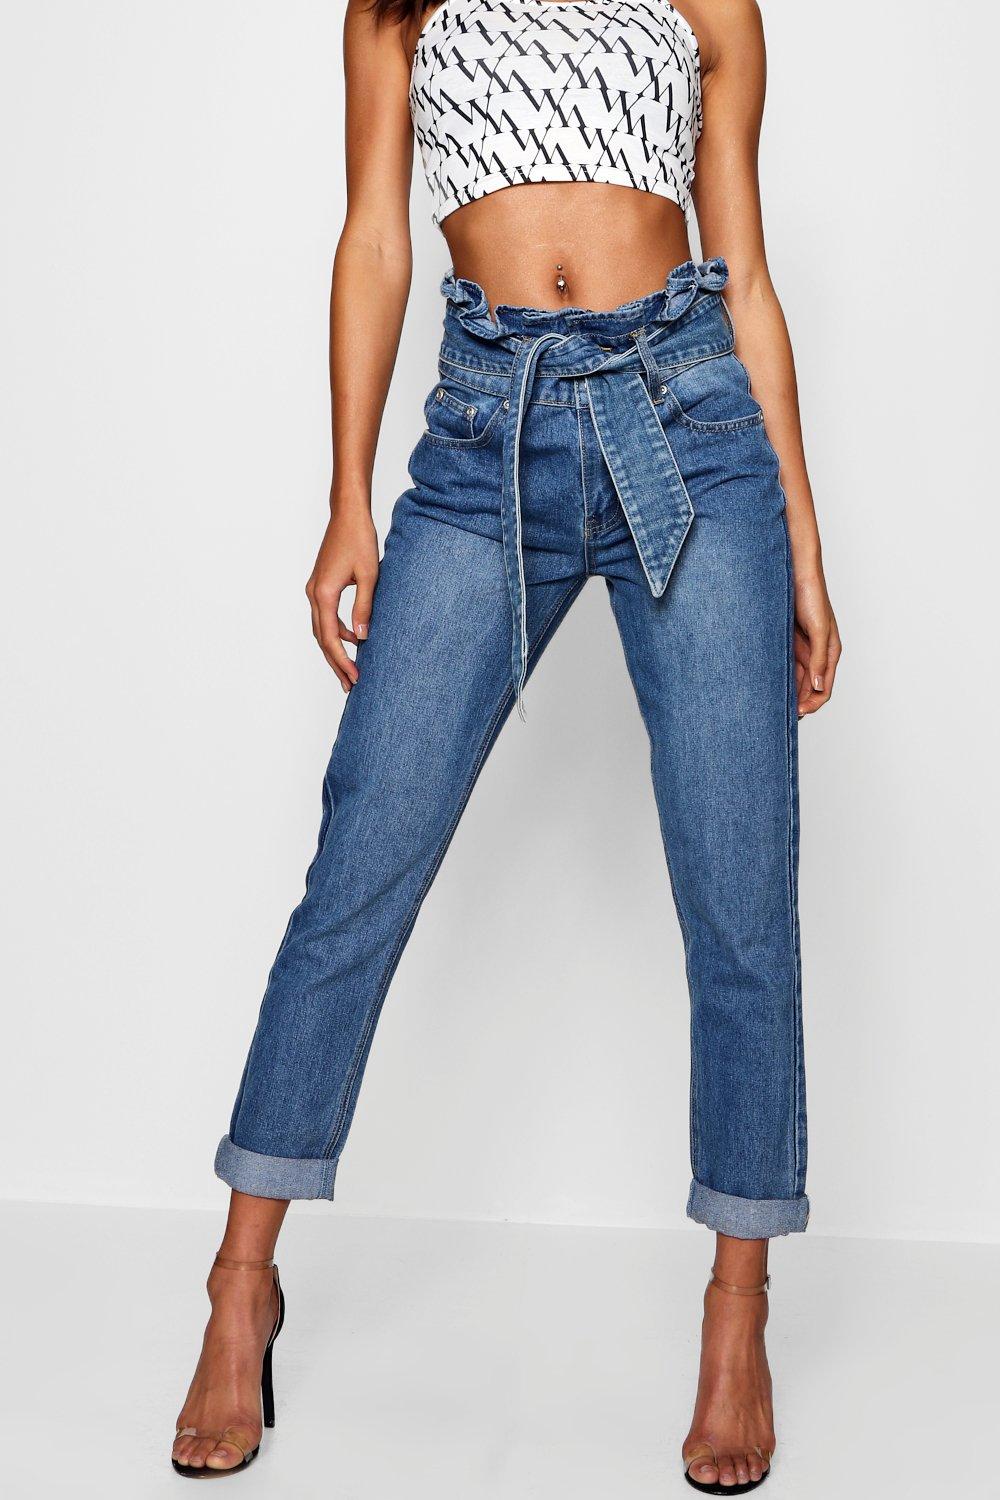 jeans for wide hips and thighs